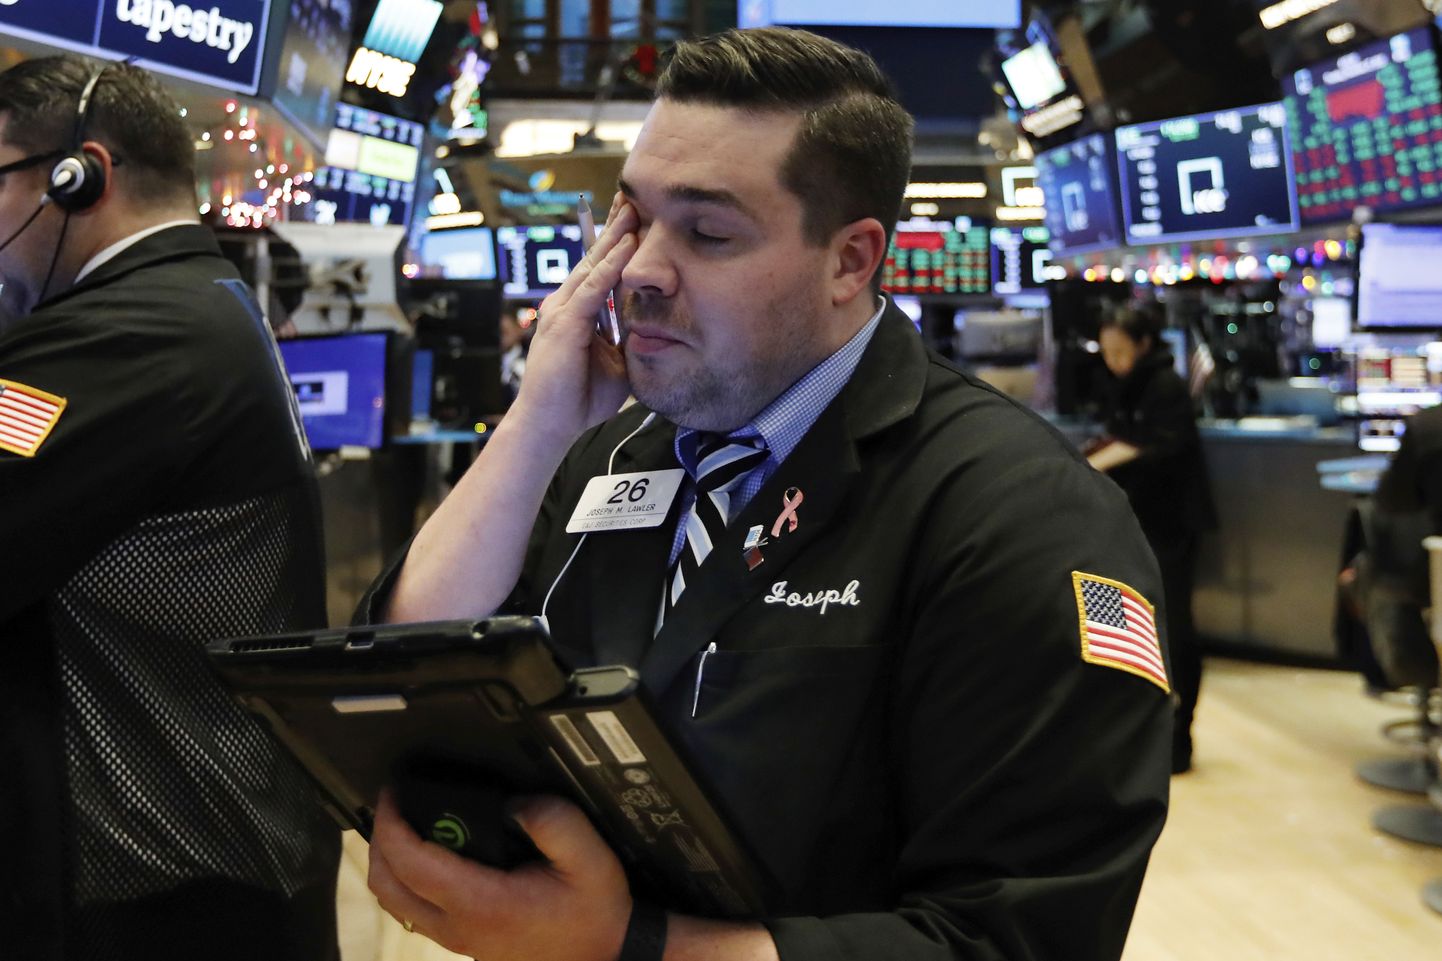 Trader Joseph Lawler works on the floor of the New York Stock Exchange at the closing bell, Thursday, Dec. 27, 2018. U.S. stocks staged a furious late-afternoon rally Thursday, closing with gains after erasing a 600-point drop in the Dow Jones Industrial Average. (AP Photo/Richard Drew)